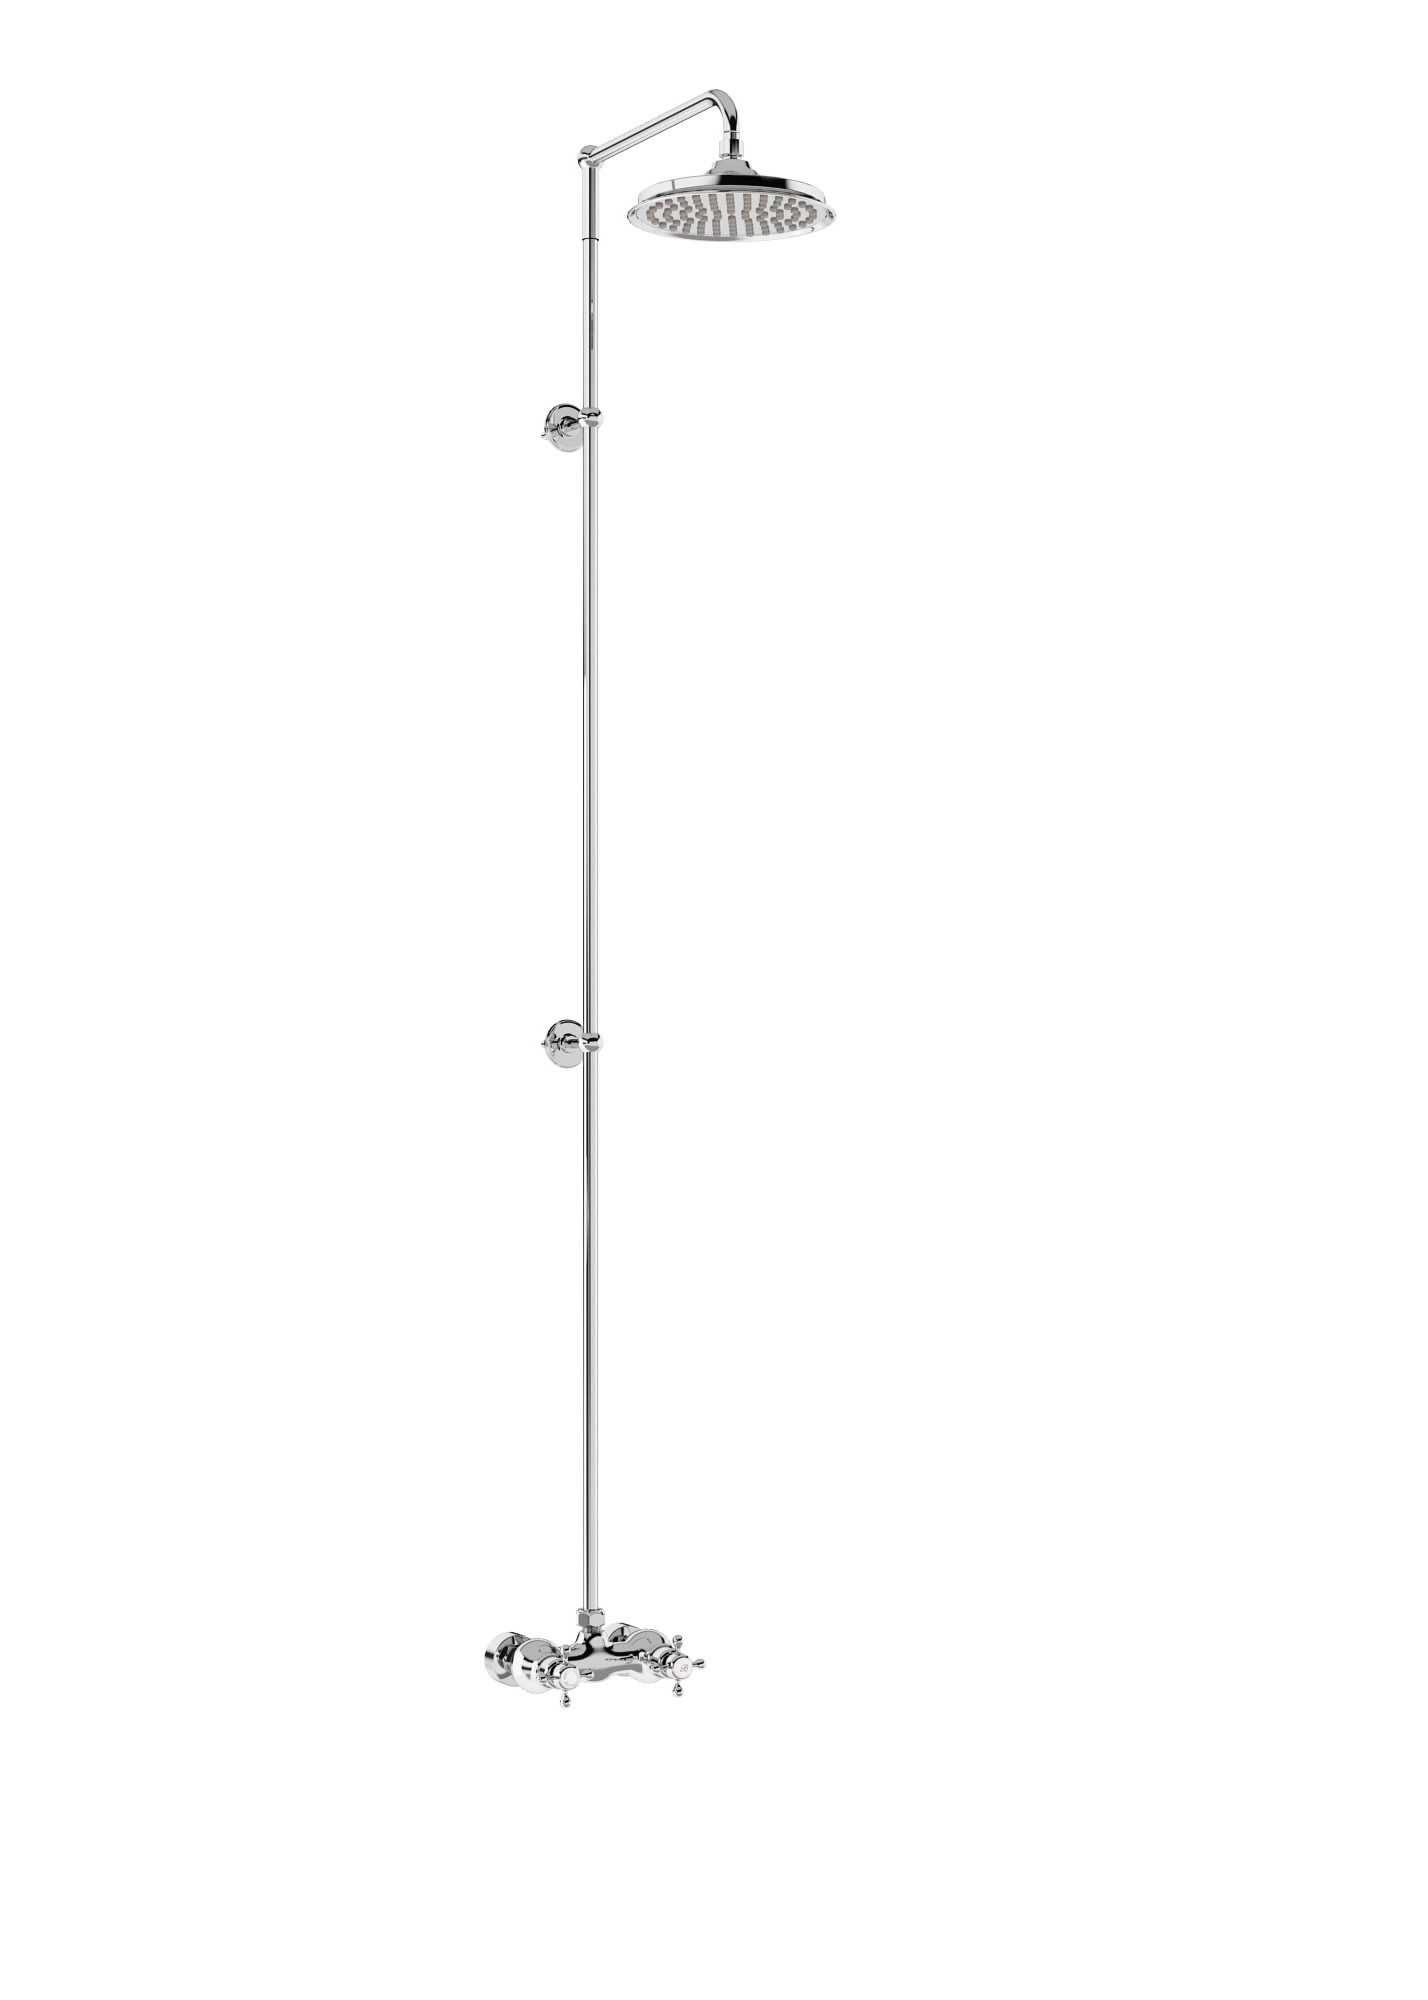 Eden Thermostatic Exposed Shower Bar Valve Single Outlet with Extended Rigid Riser and Swivel Shower Arm with 12 inch rose